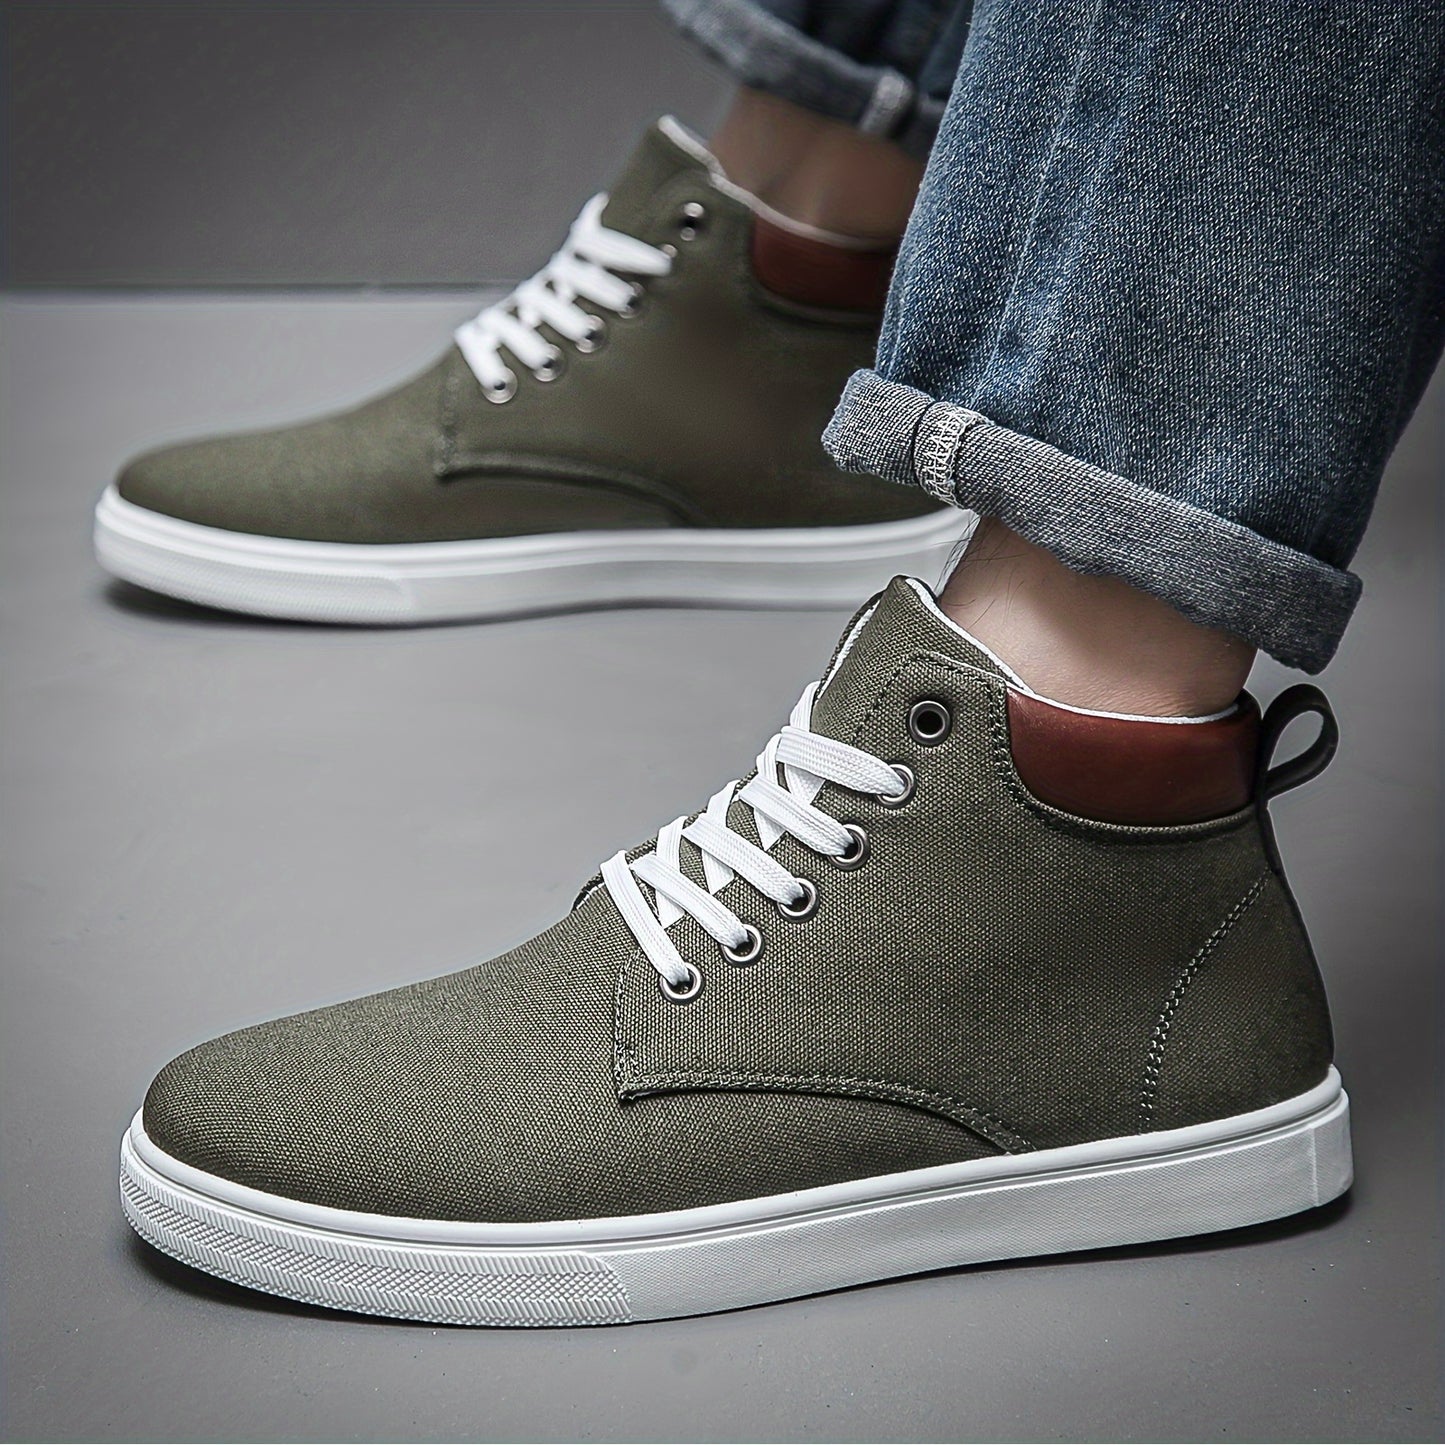 Canvas High Top Skate Shoes - Men's Lace-up Sneakers for Halloween